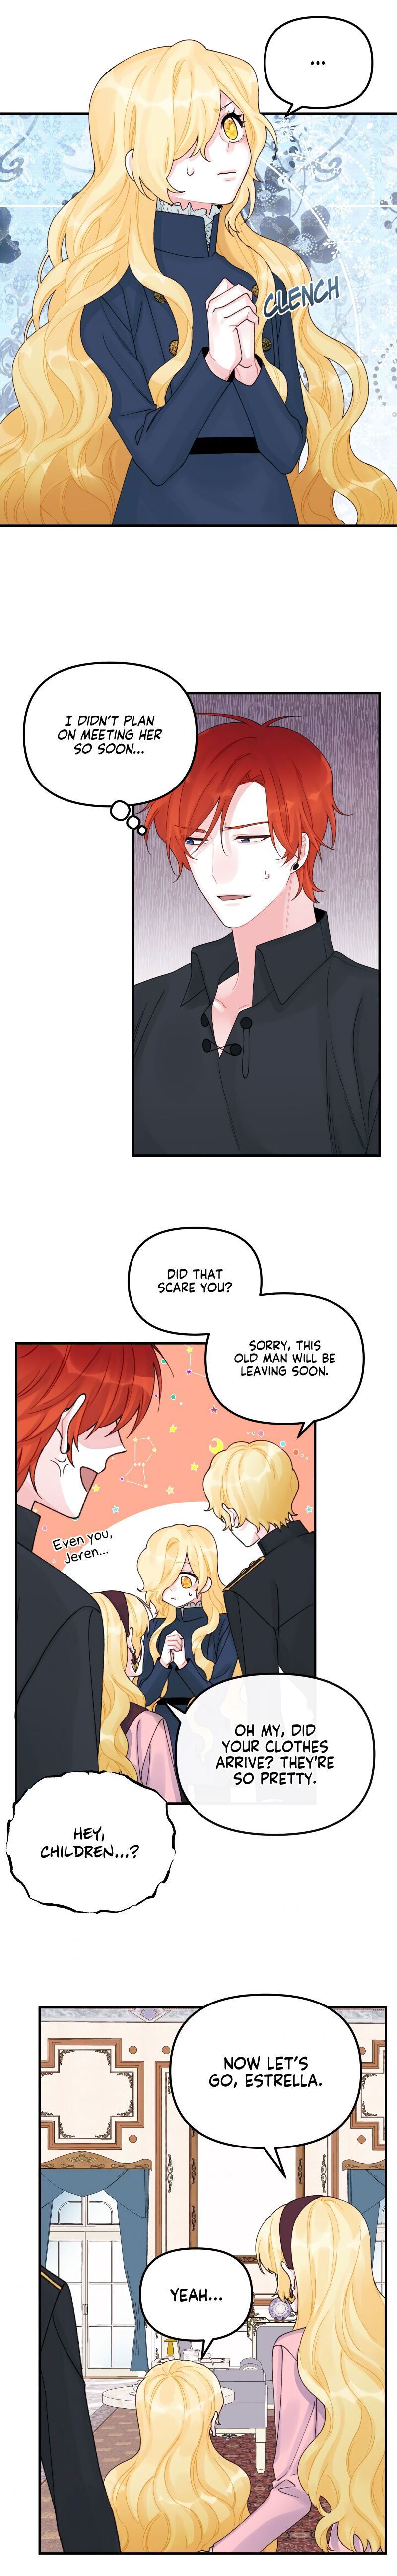 the-princess-in-the-dumpster-chap-32-11